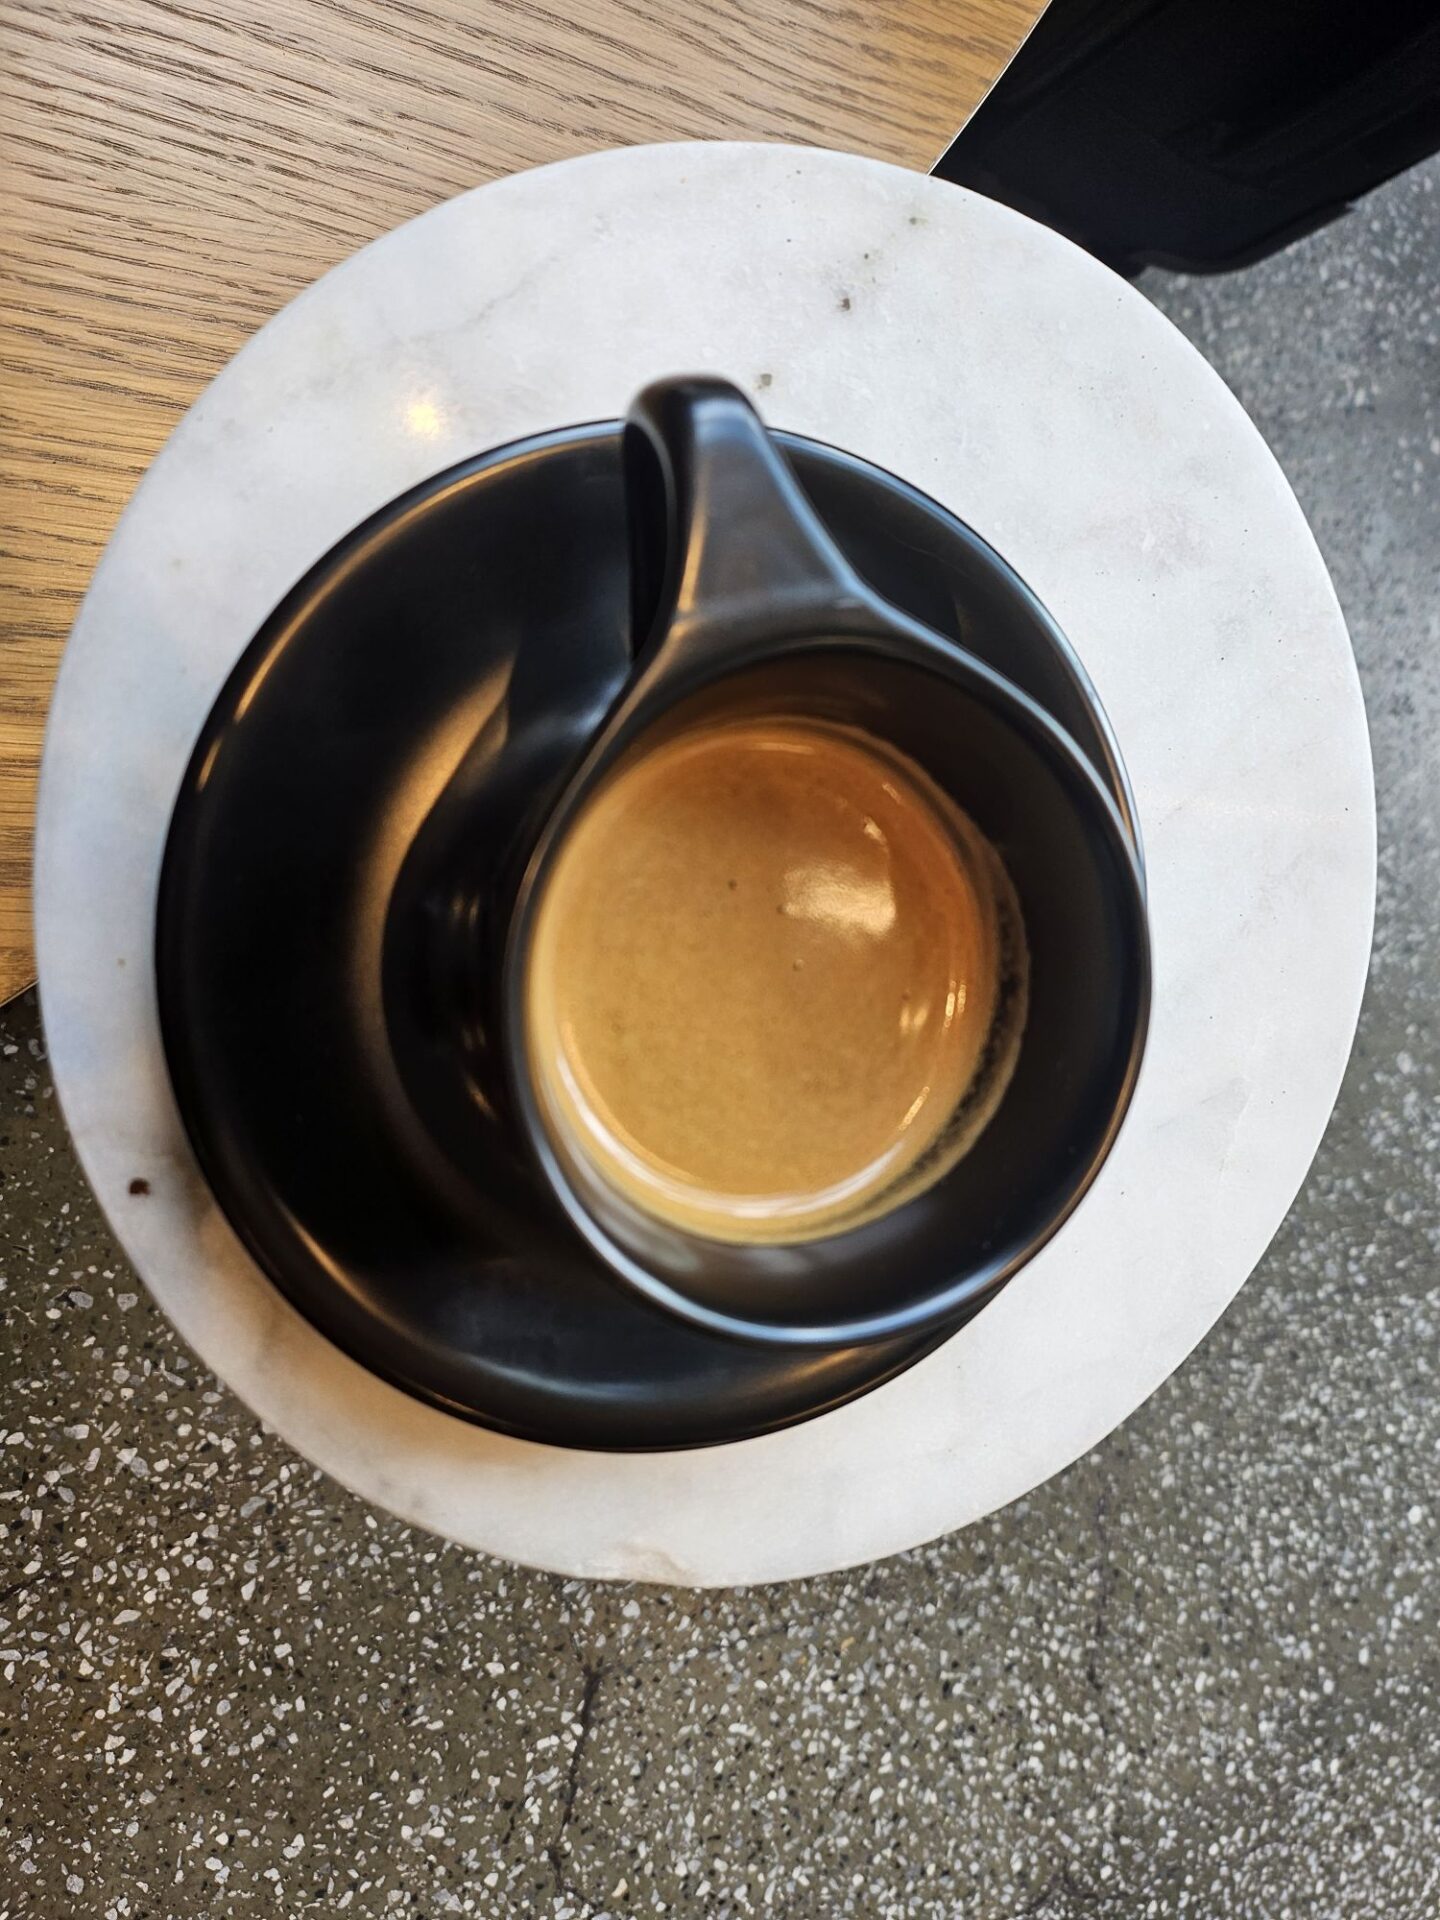 a black cup with a brown liquid in it